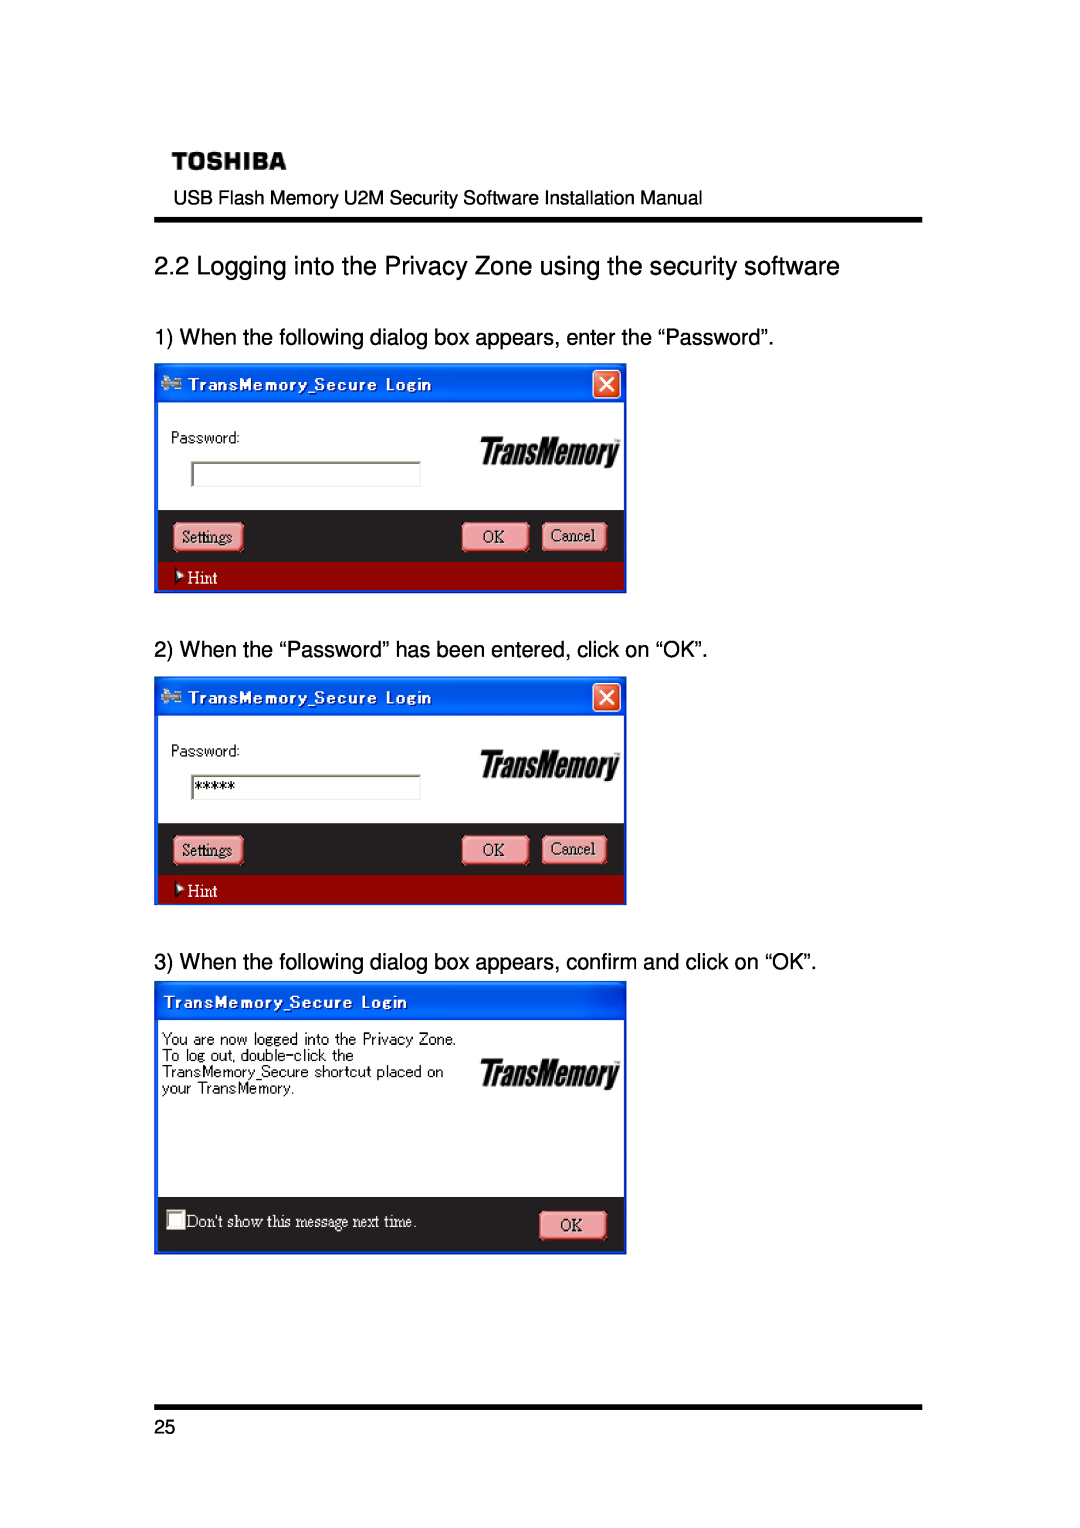 Toshiba U2M-004GT, U2M-016GT, U2M-008GT installation manual Logging into the Privacy Zone using the security software 